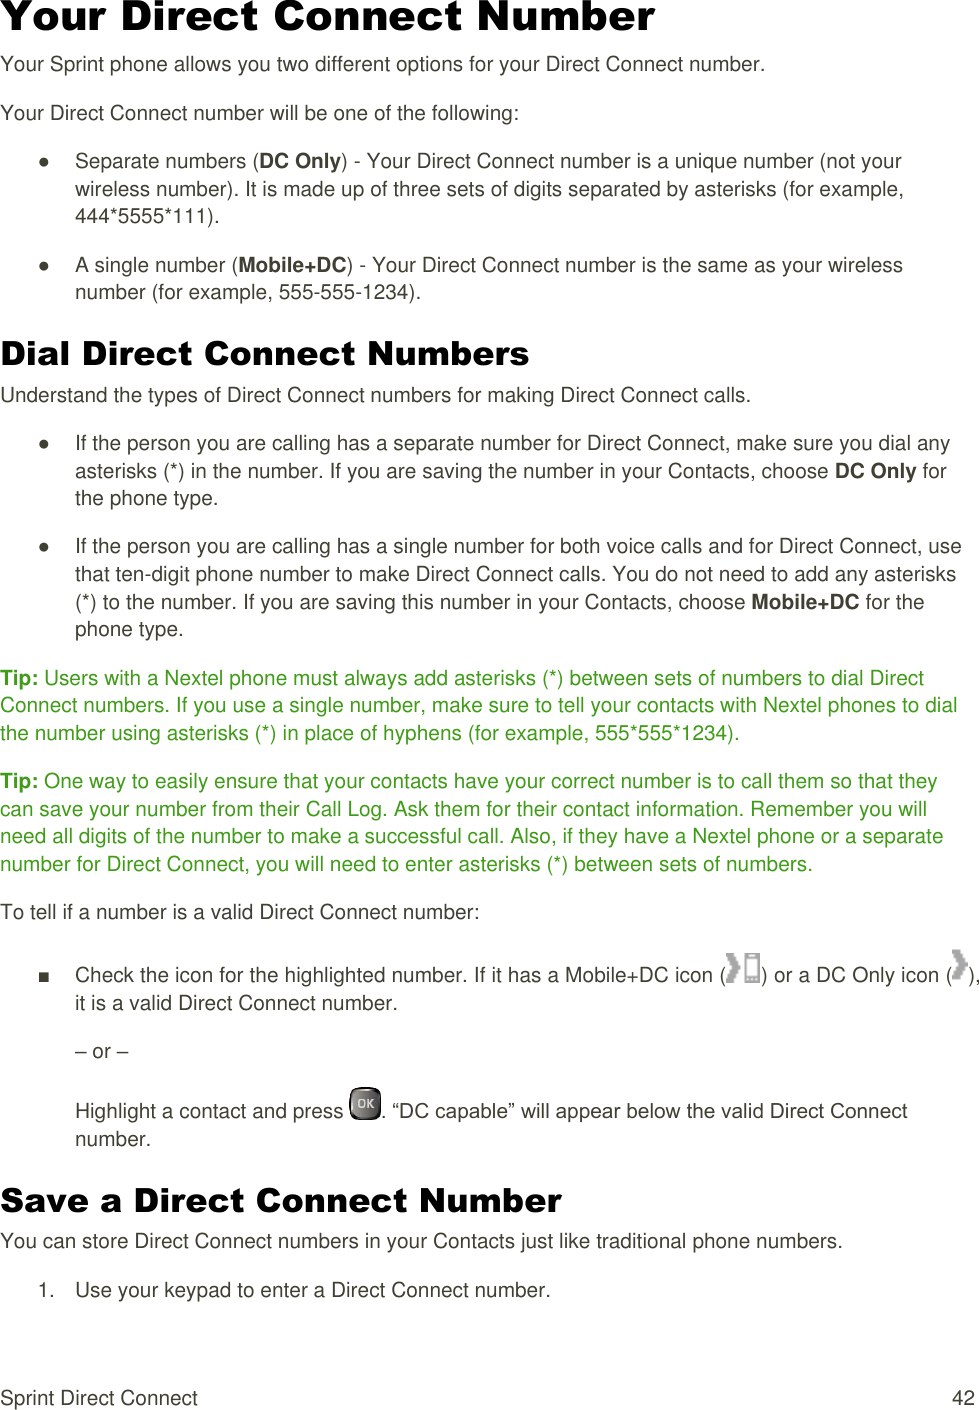  Sprint Direct Connect  42 Your Direct Connect Number Your Sprint phone allows you two different options for your Direct Connect number. Your Direct Connect number will be one of the following: ●  Separate numbers (DC Only) - Your Direct Connect number is a unique number (not your wireless number). It is made up of three sets of digits separated by asterisks (for example, 444*5555*111). ●  A single number (Mobile+DC) - Your Direct Connect number is the same as your wireless number (for example, 555-555-1234). Dial Direct Connect Numbers Understand the types of Direct Connect numbers for making Direct Connect calls. ●  If the person you are calling has a separate number for Direct Connect, make sure you dial any asterisks (*) in the number. If you are saving the number in your Contacts, choose DC Only for the phone type. ●  If the person you are calling has a single number for both voice calls and for Direct Connect, use that ten-digit phone number to make Direct Connect calls. You do not need to add any asterisks (*) to the number. If you are saving this number in your Contacts, choose Mobile+DC for the phone type. Tip: Users with a Nextel phone must always add asterisks (*) between sets of numbers to dial Direct Connect numbers. If you use a single number, make sure to tell your contacts with Nextel phones to dial the number using asterisks (*) in place of hyphens (for example, 555*555*1234). Tip: One way to easily ensure that your contacts have your correct number is to call them so that they can save your number from their Call Log. Ask them for their contact information. Remember you will need all digits of the number to make a successful call. Also, if they have a Nextel phone or a separate number for Direct Connect, you will need to enter asterisks (*) between sets of numbers. To tell if a number is a valid Direct Connect number: ■  Check the icon for the highlighted number. If it has a Mobile+DC icon ( ) or a DC Only icon ( ), it is a valid Direct Connect number. – or – Highlight a contact and press  . “DC capable” will appear below the valid Direct Connect number. Save a Direct Connect Number You can store Direct Connect numbers in your Contacts just like traditional phone numbers. 1.  Use your keypad to enter a Direct Connect number. 